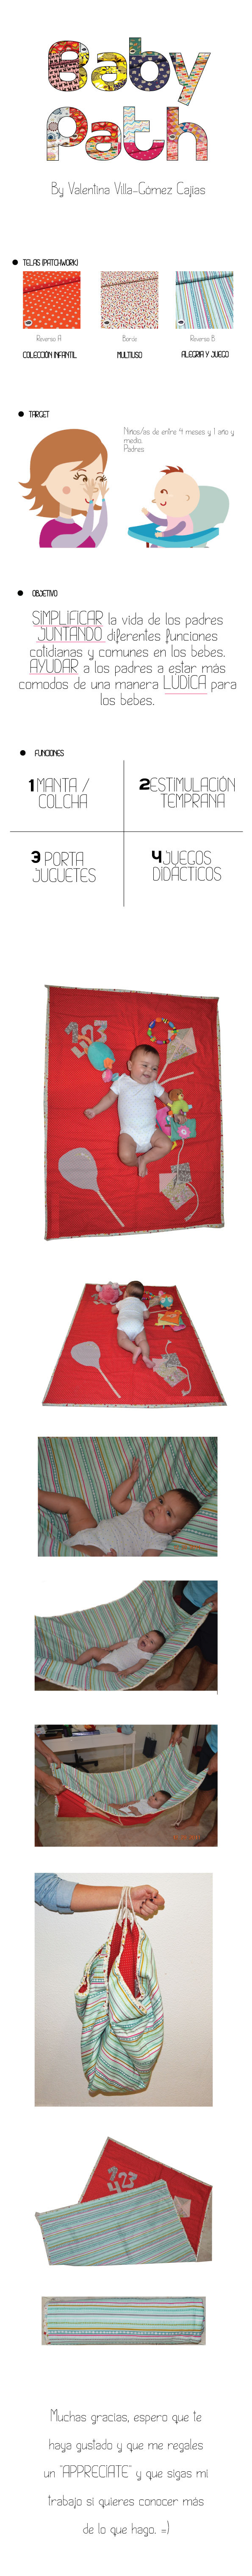 baby kids game design play interaction